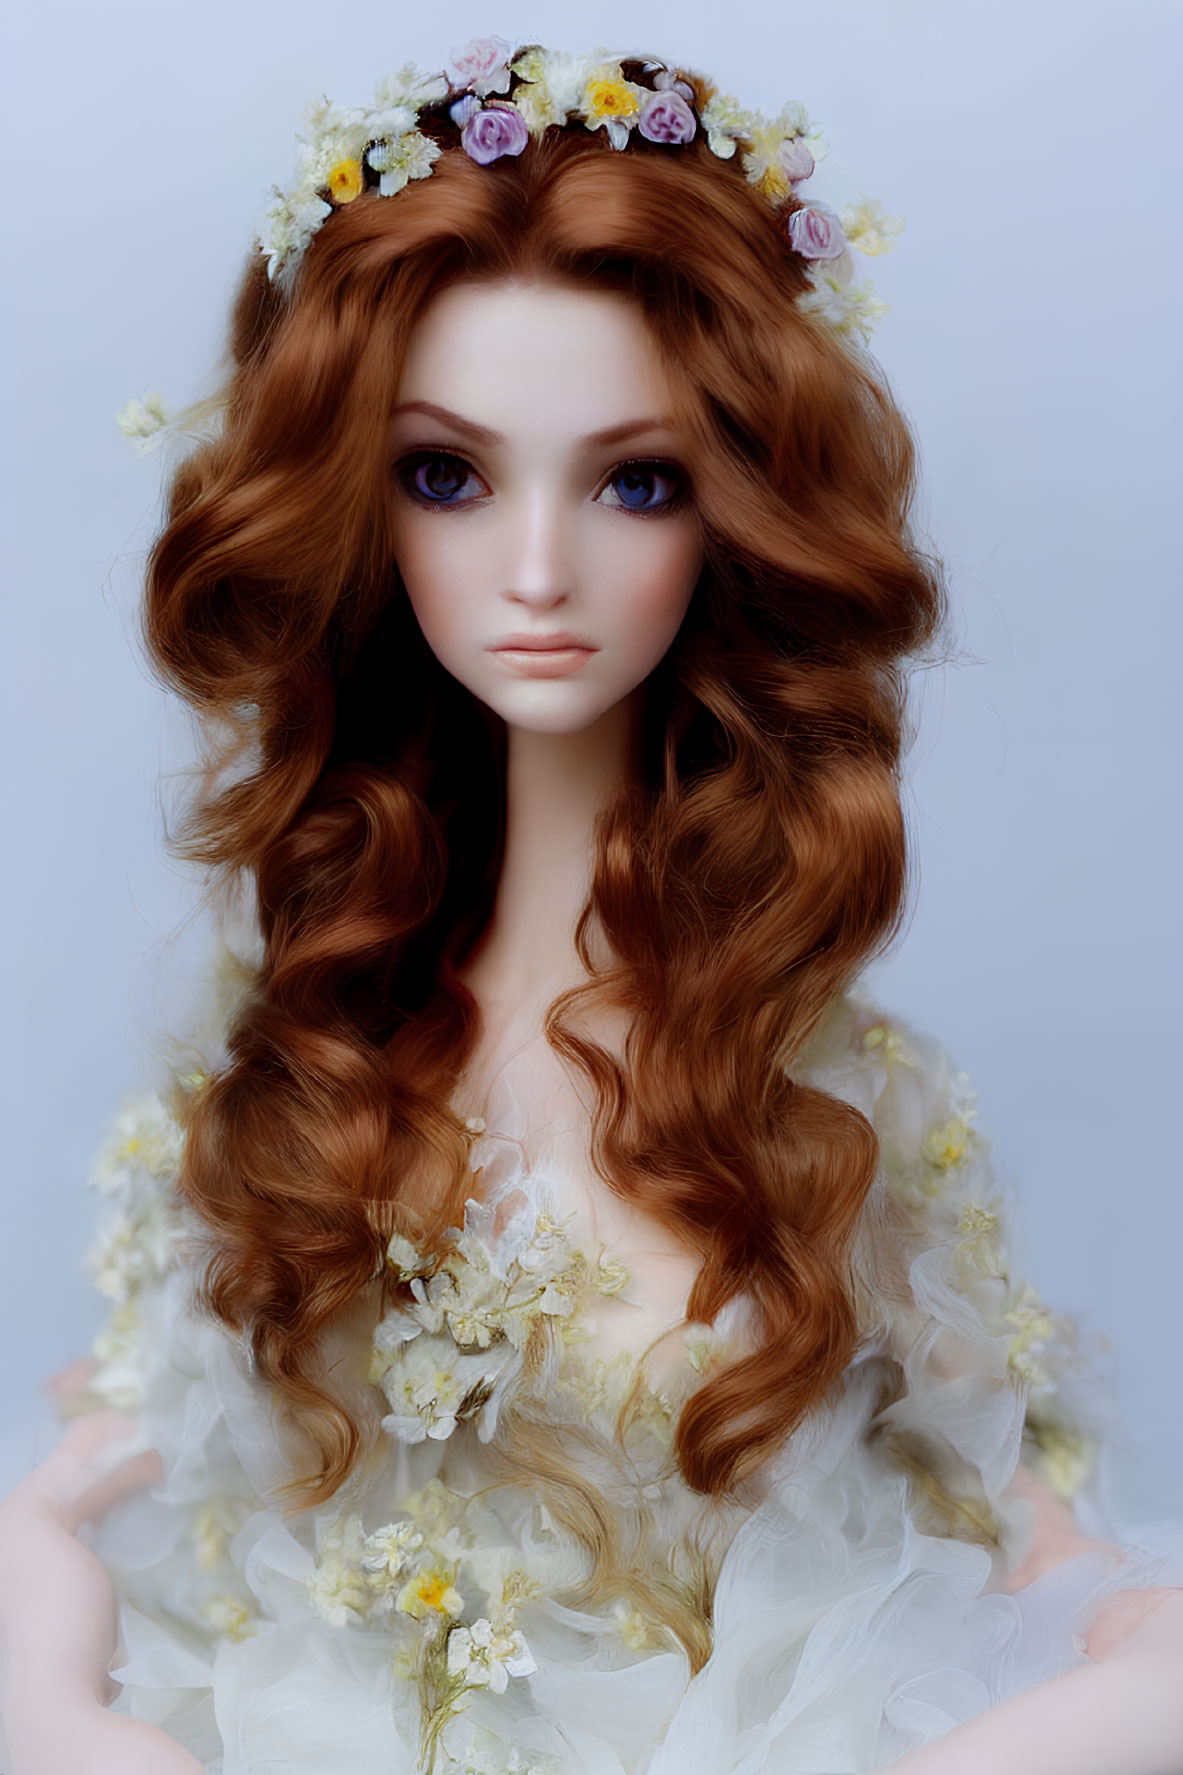 Realistic doll with auburn hair, floral crown, and white dress